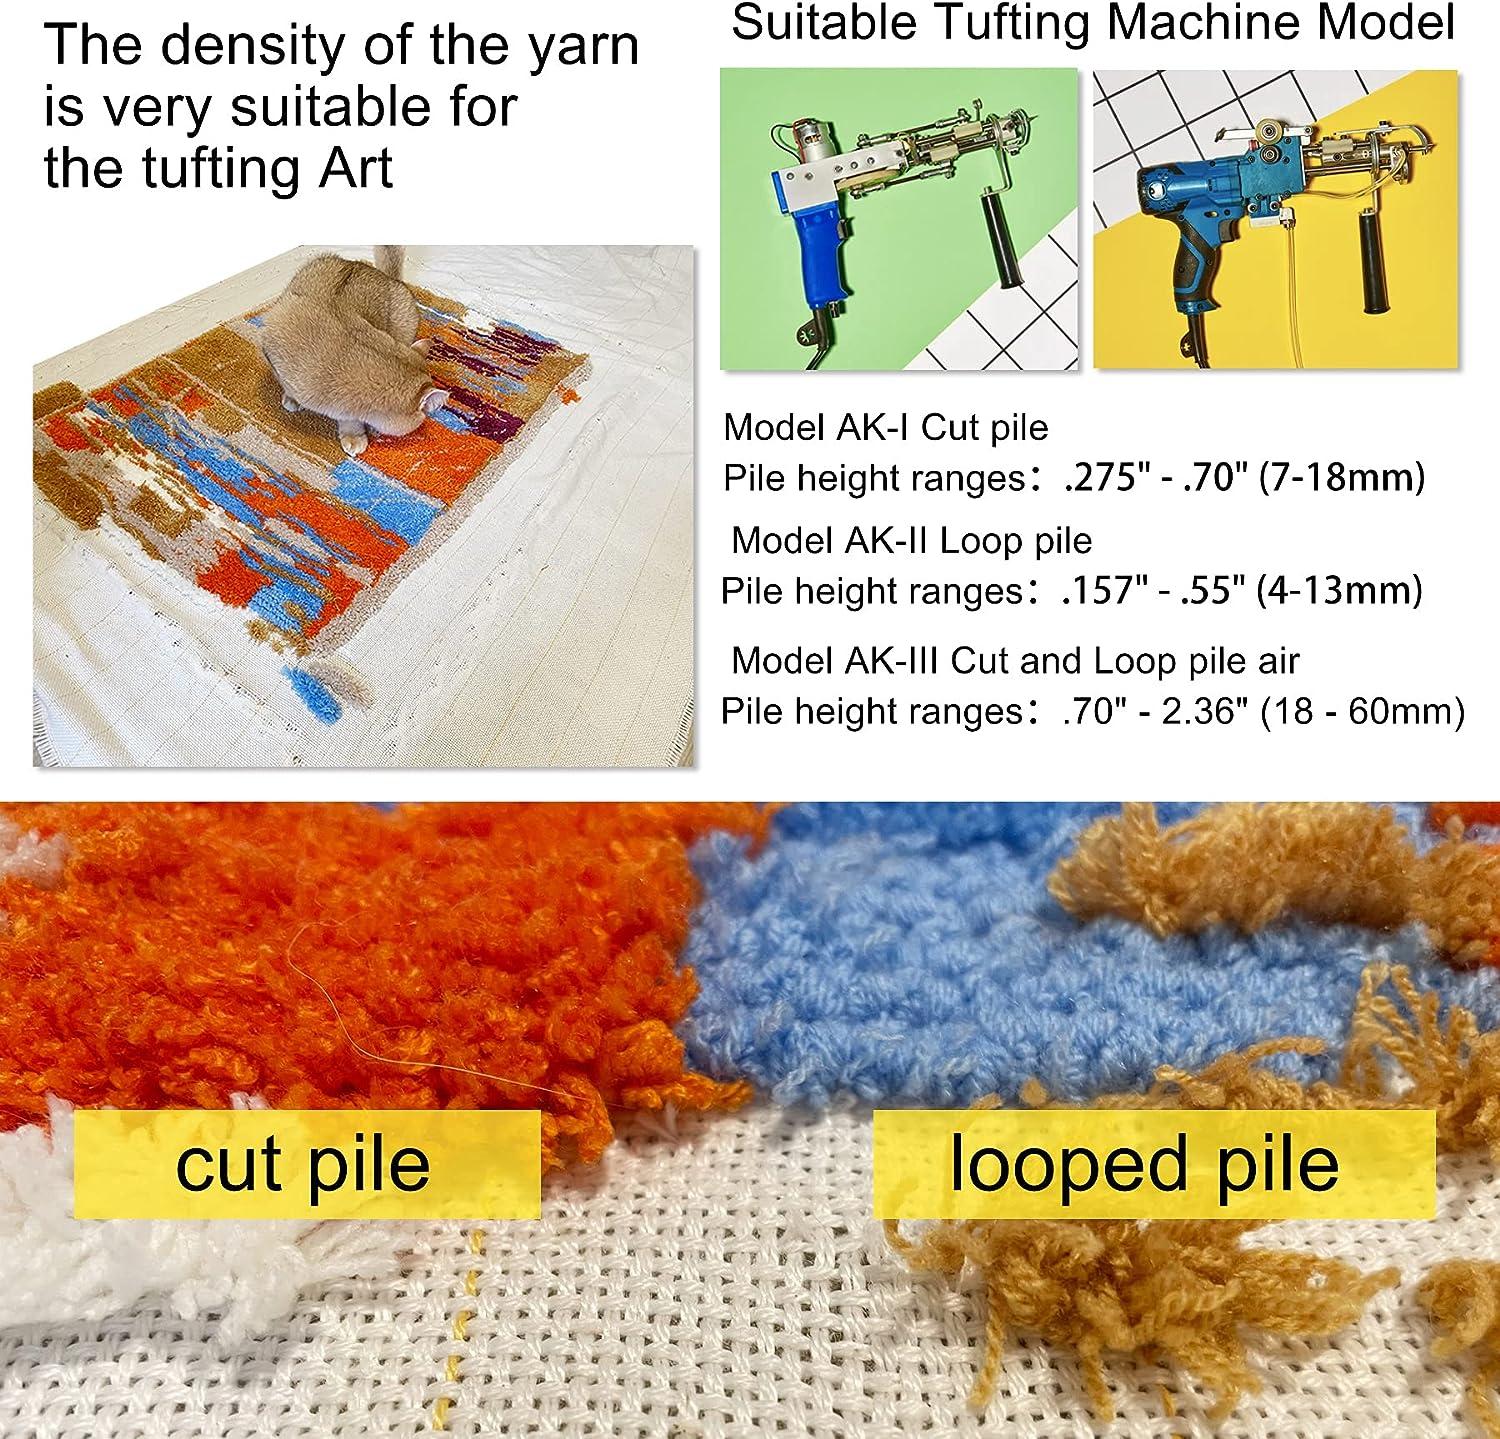 Primary Tufting Cloth 4 x 2 m Backing Fabric for Rug Tufting Guns